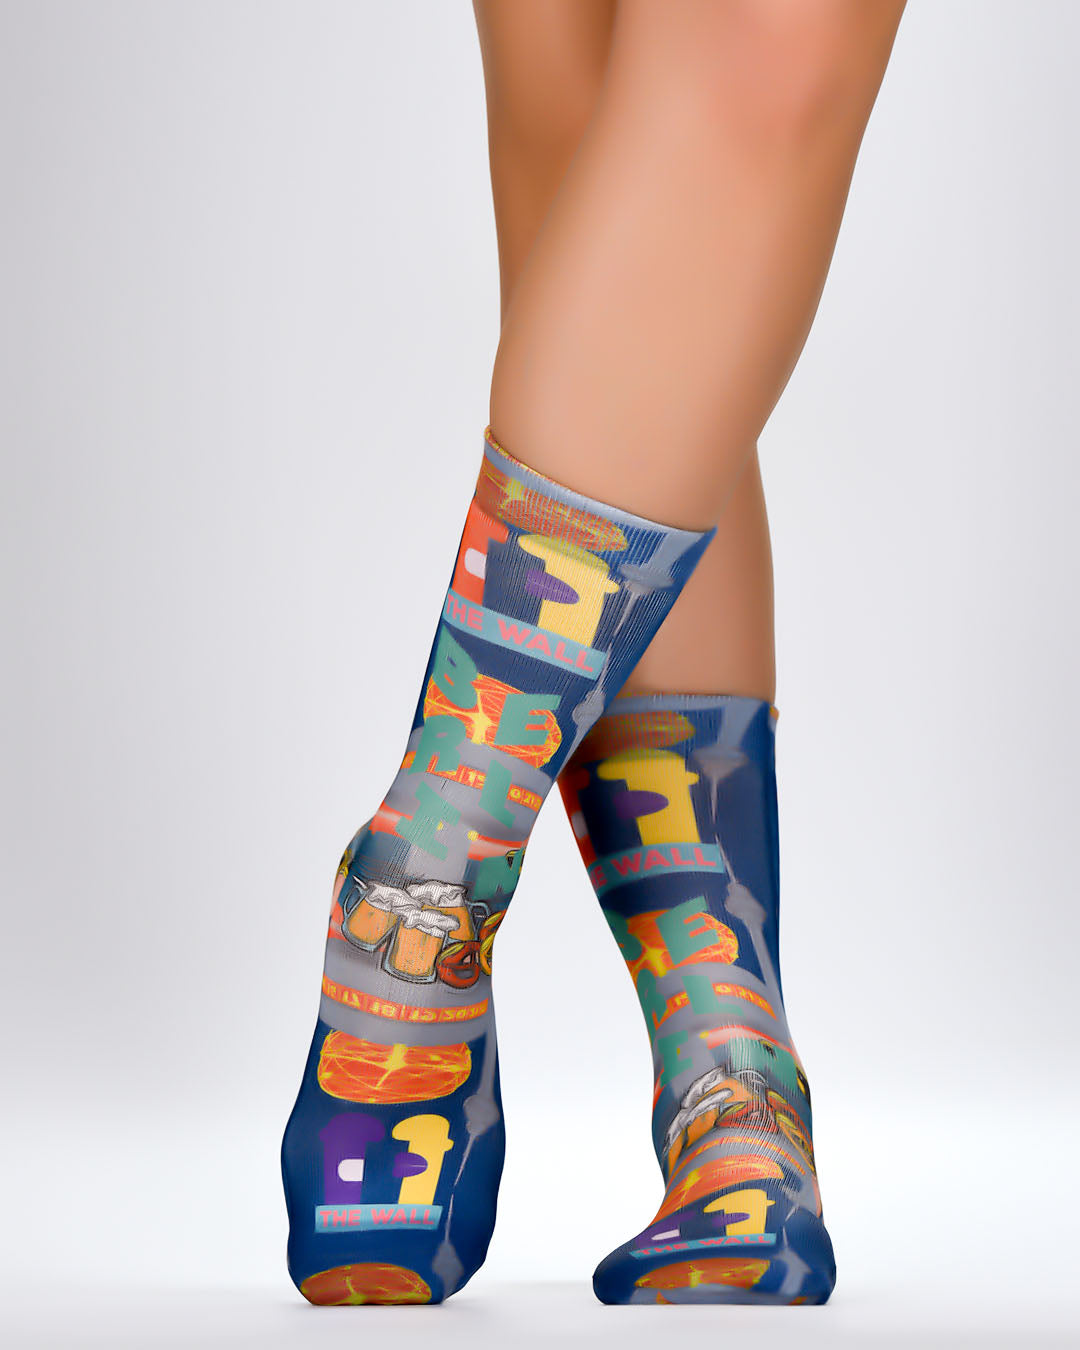 Calcetines divertidos Mujer Kisses and Glasses Wigglesteps